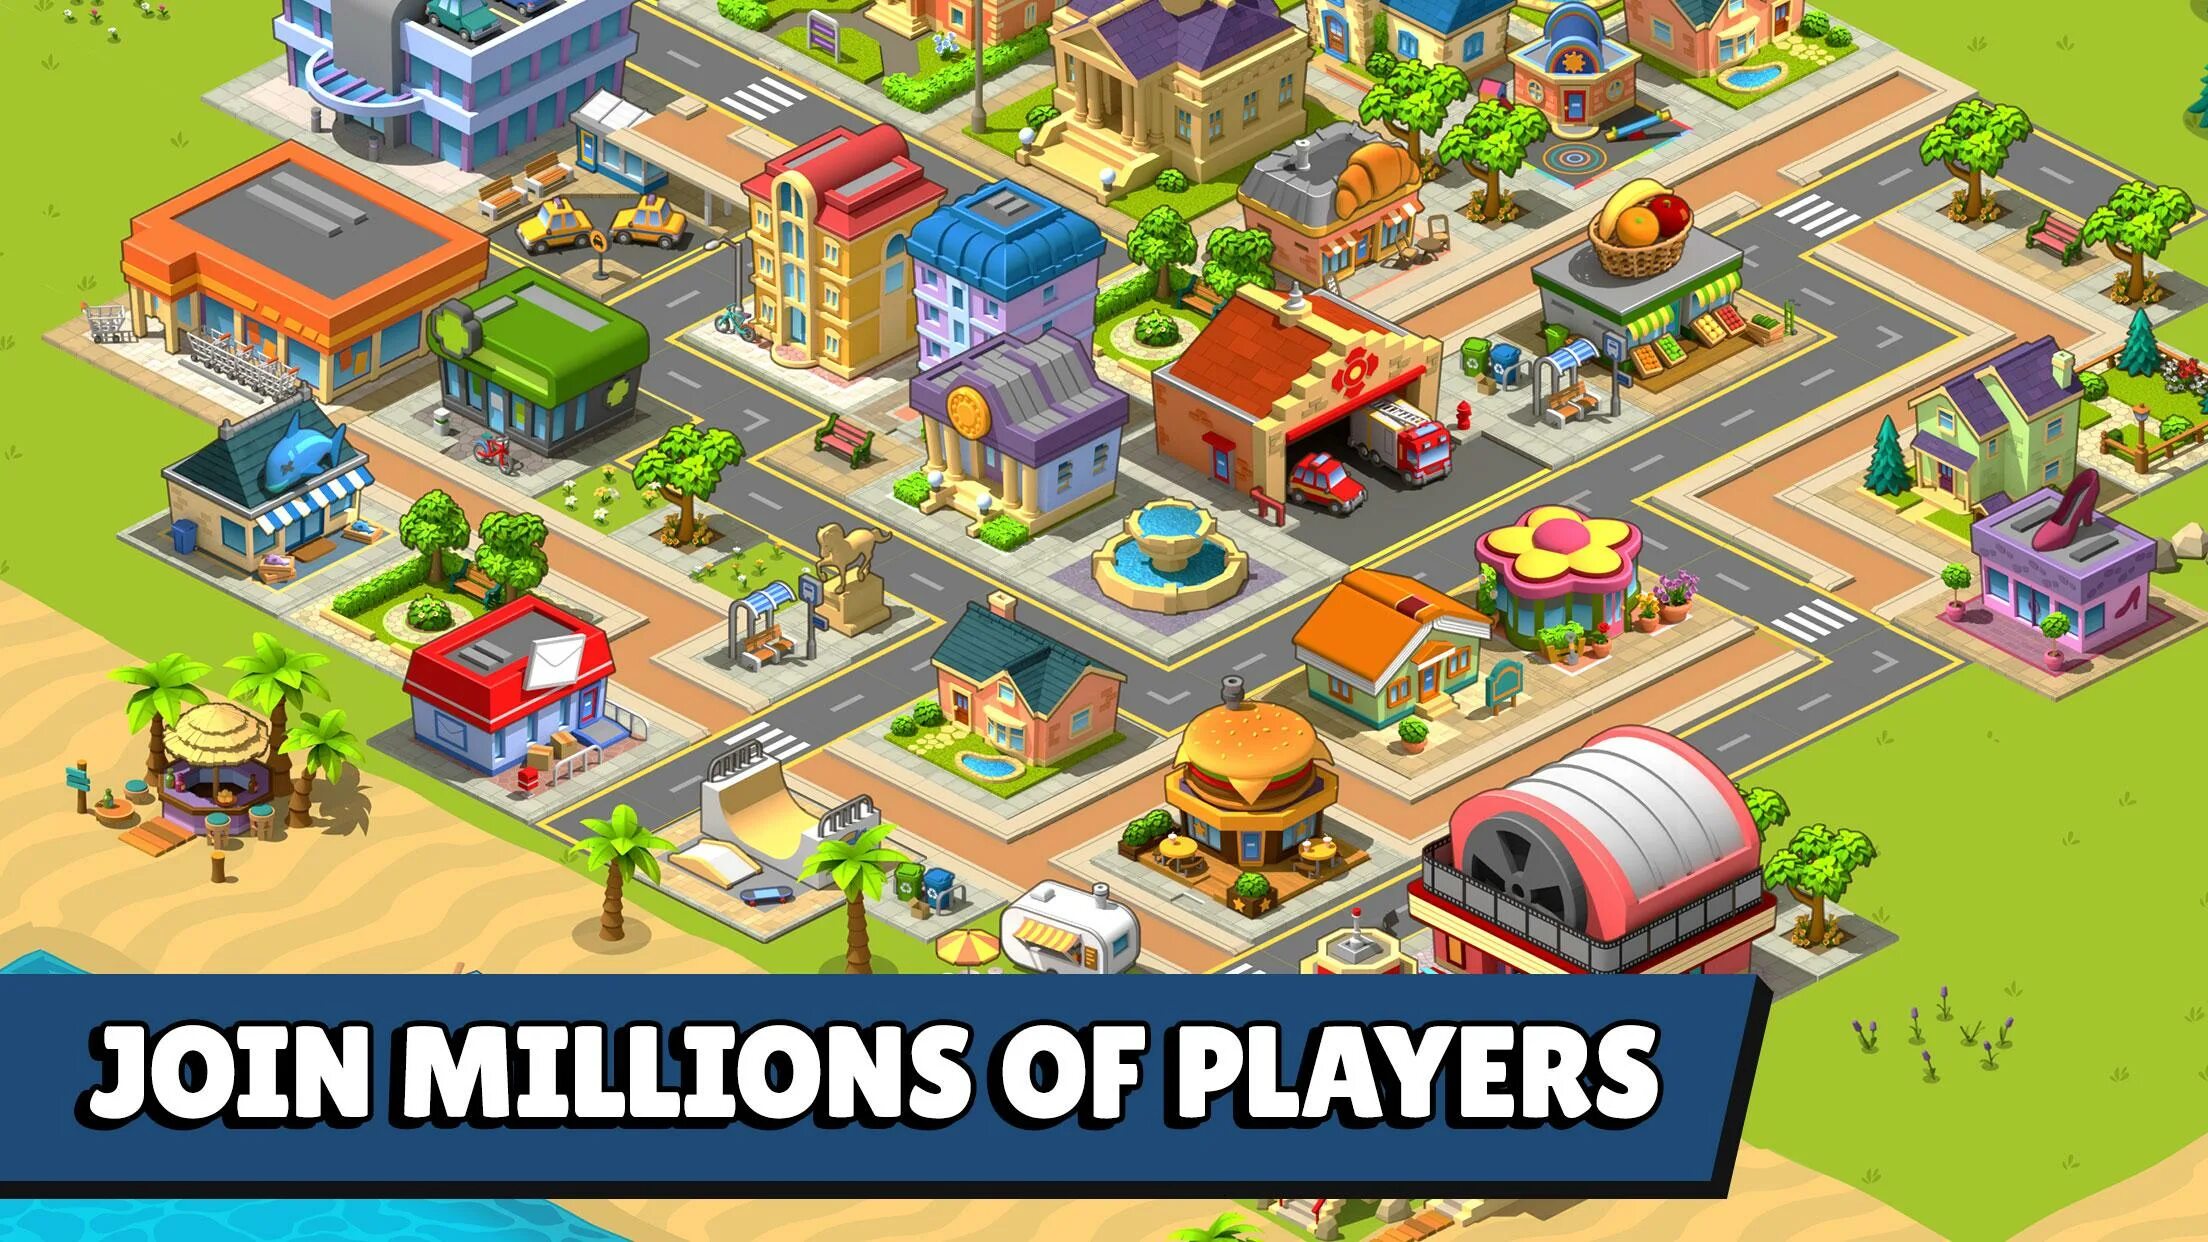 What your city town or village is. Игра Village City. Village City: Island SIM. Village City Town building. Village City Island Simulation games.